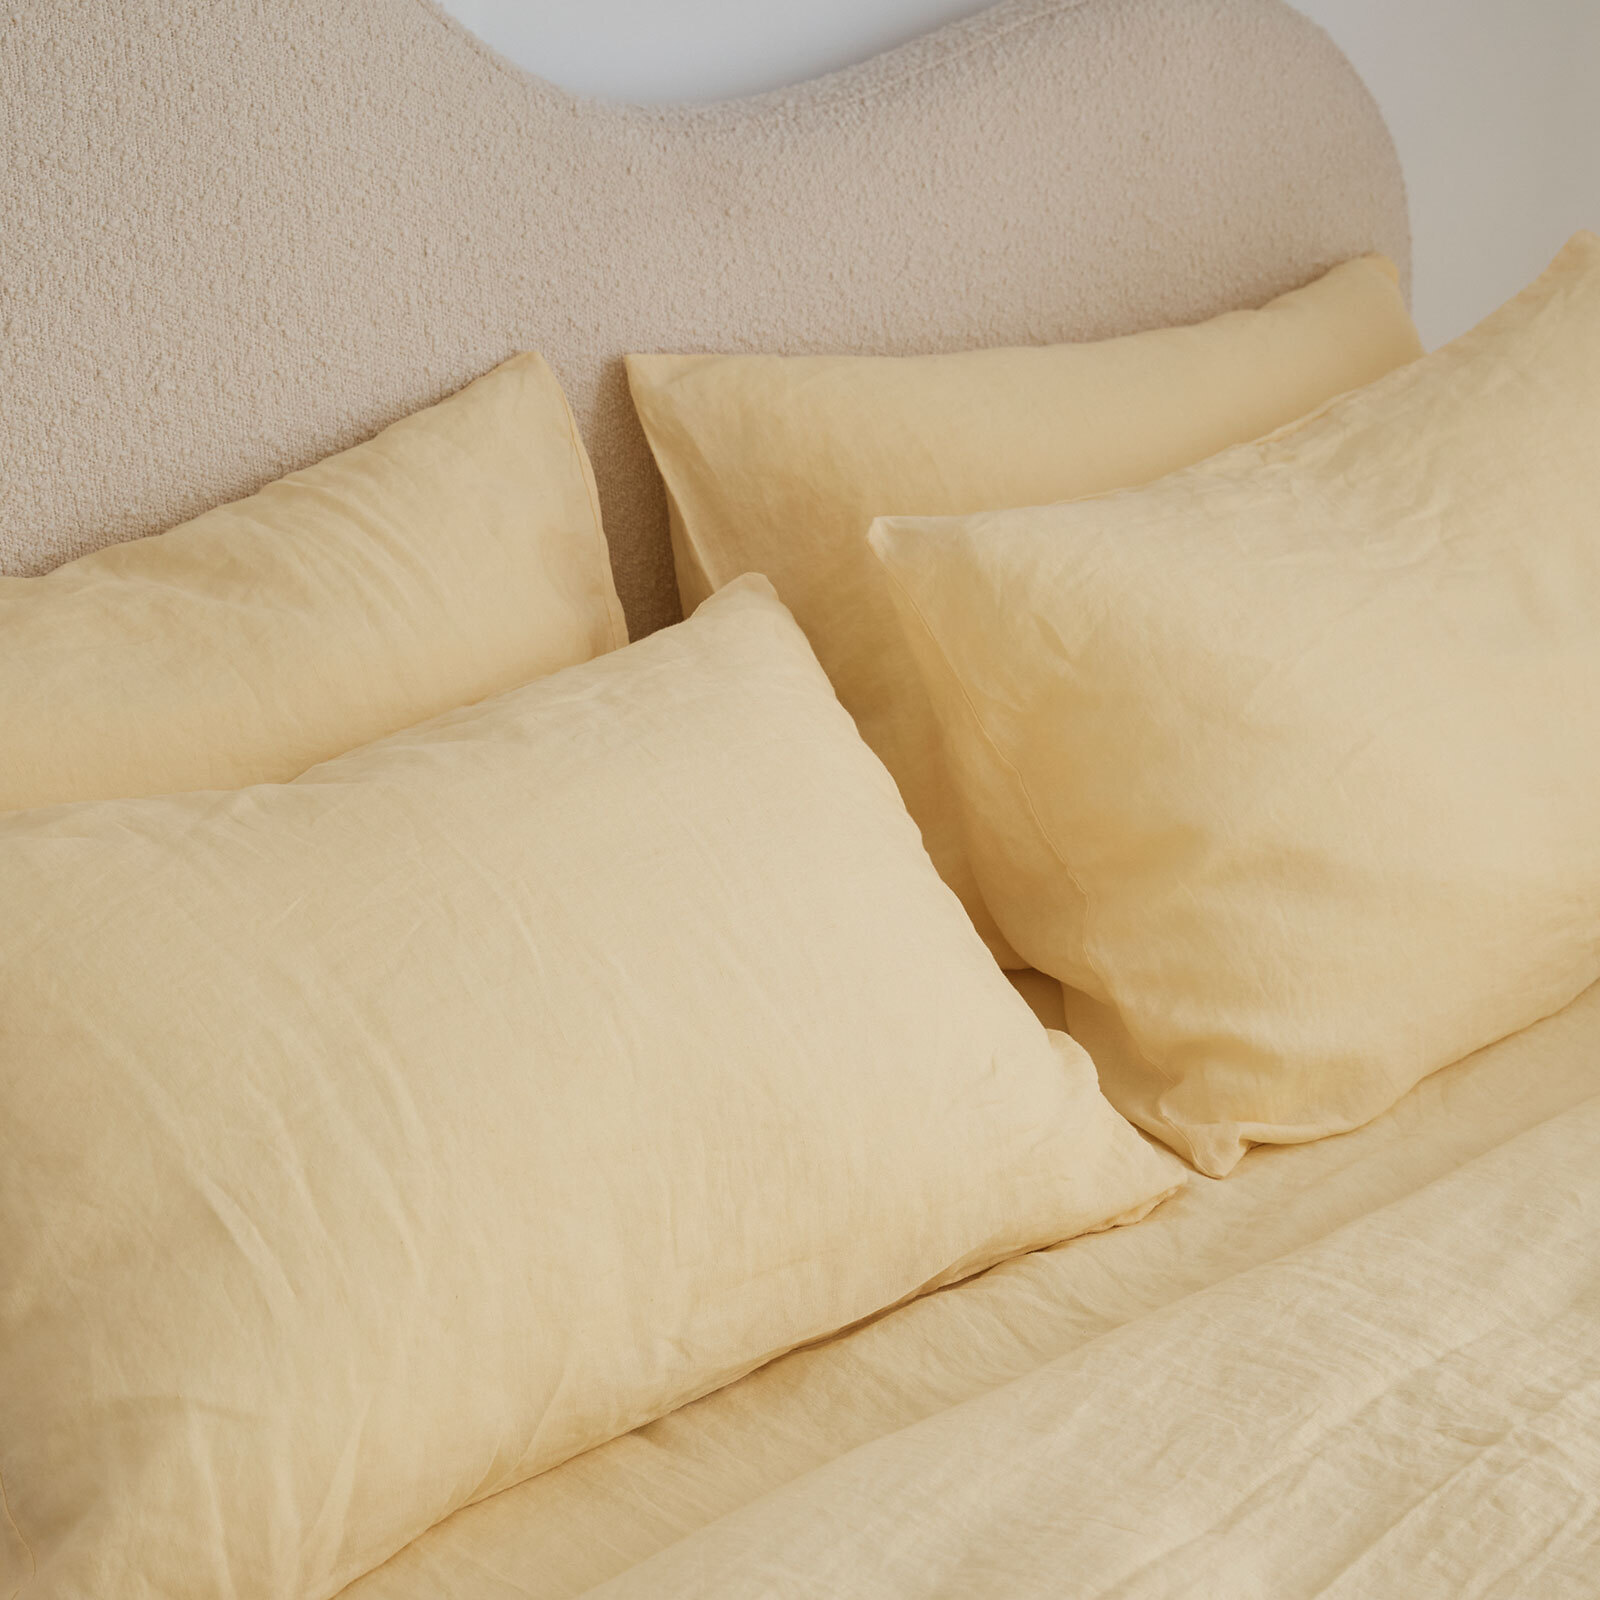 100% pure French linen Duvet Cover in Daisy